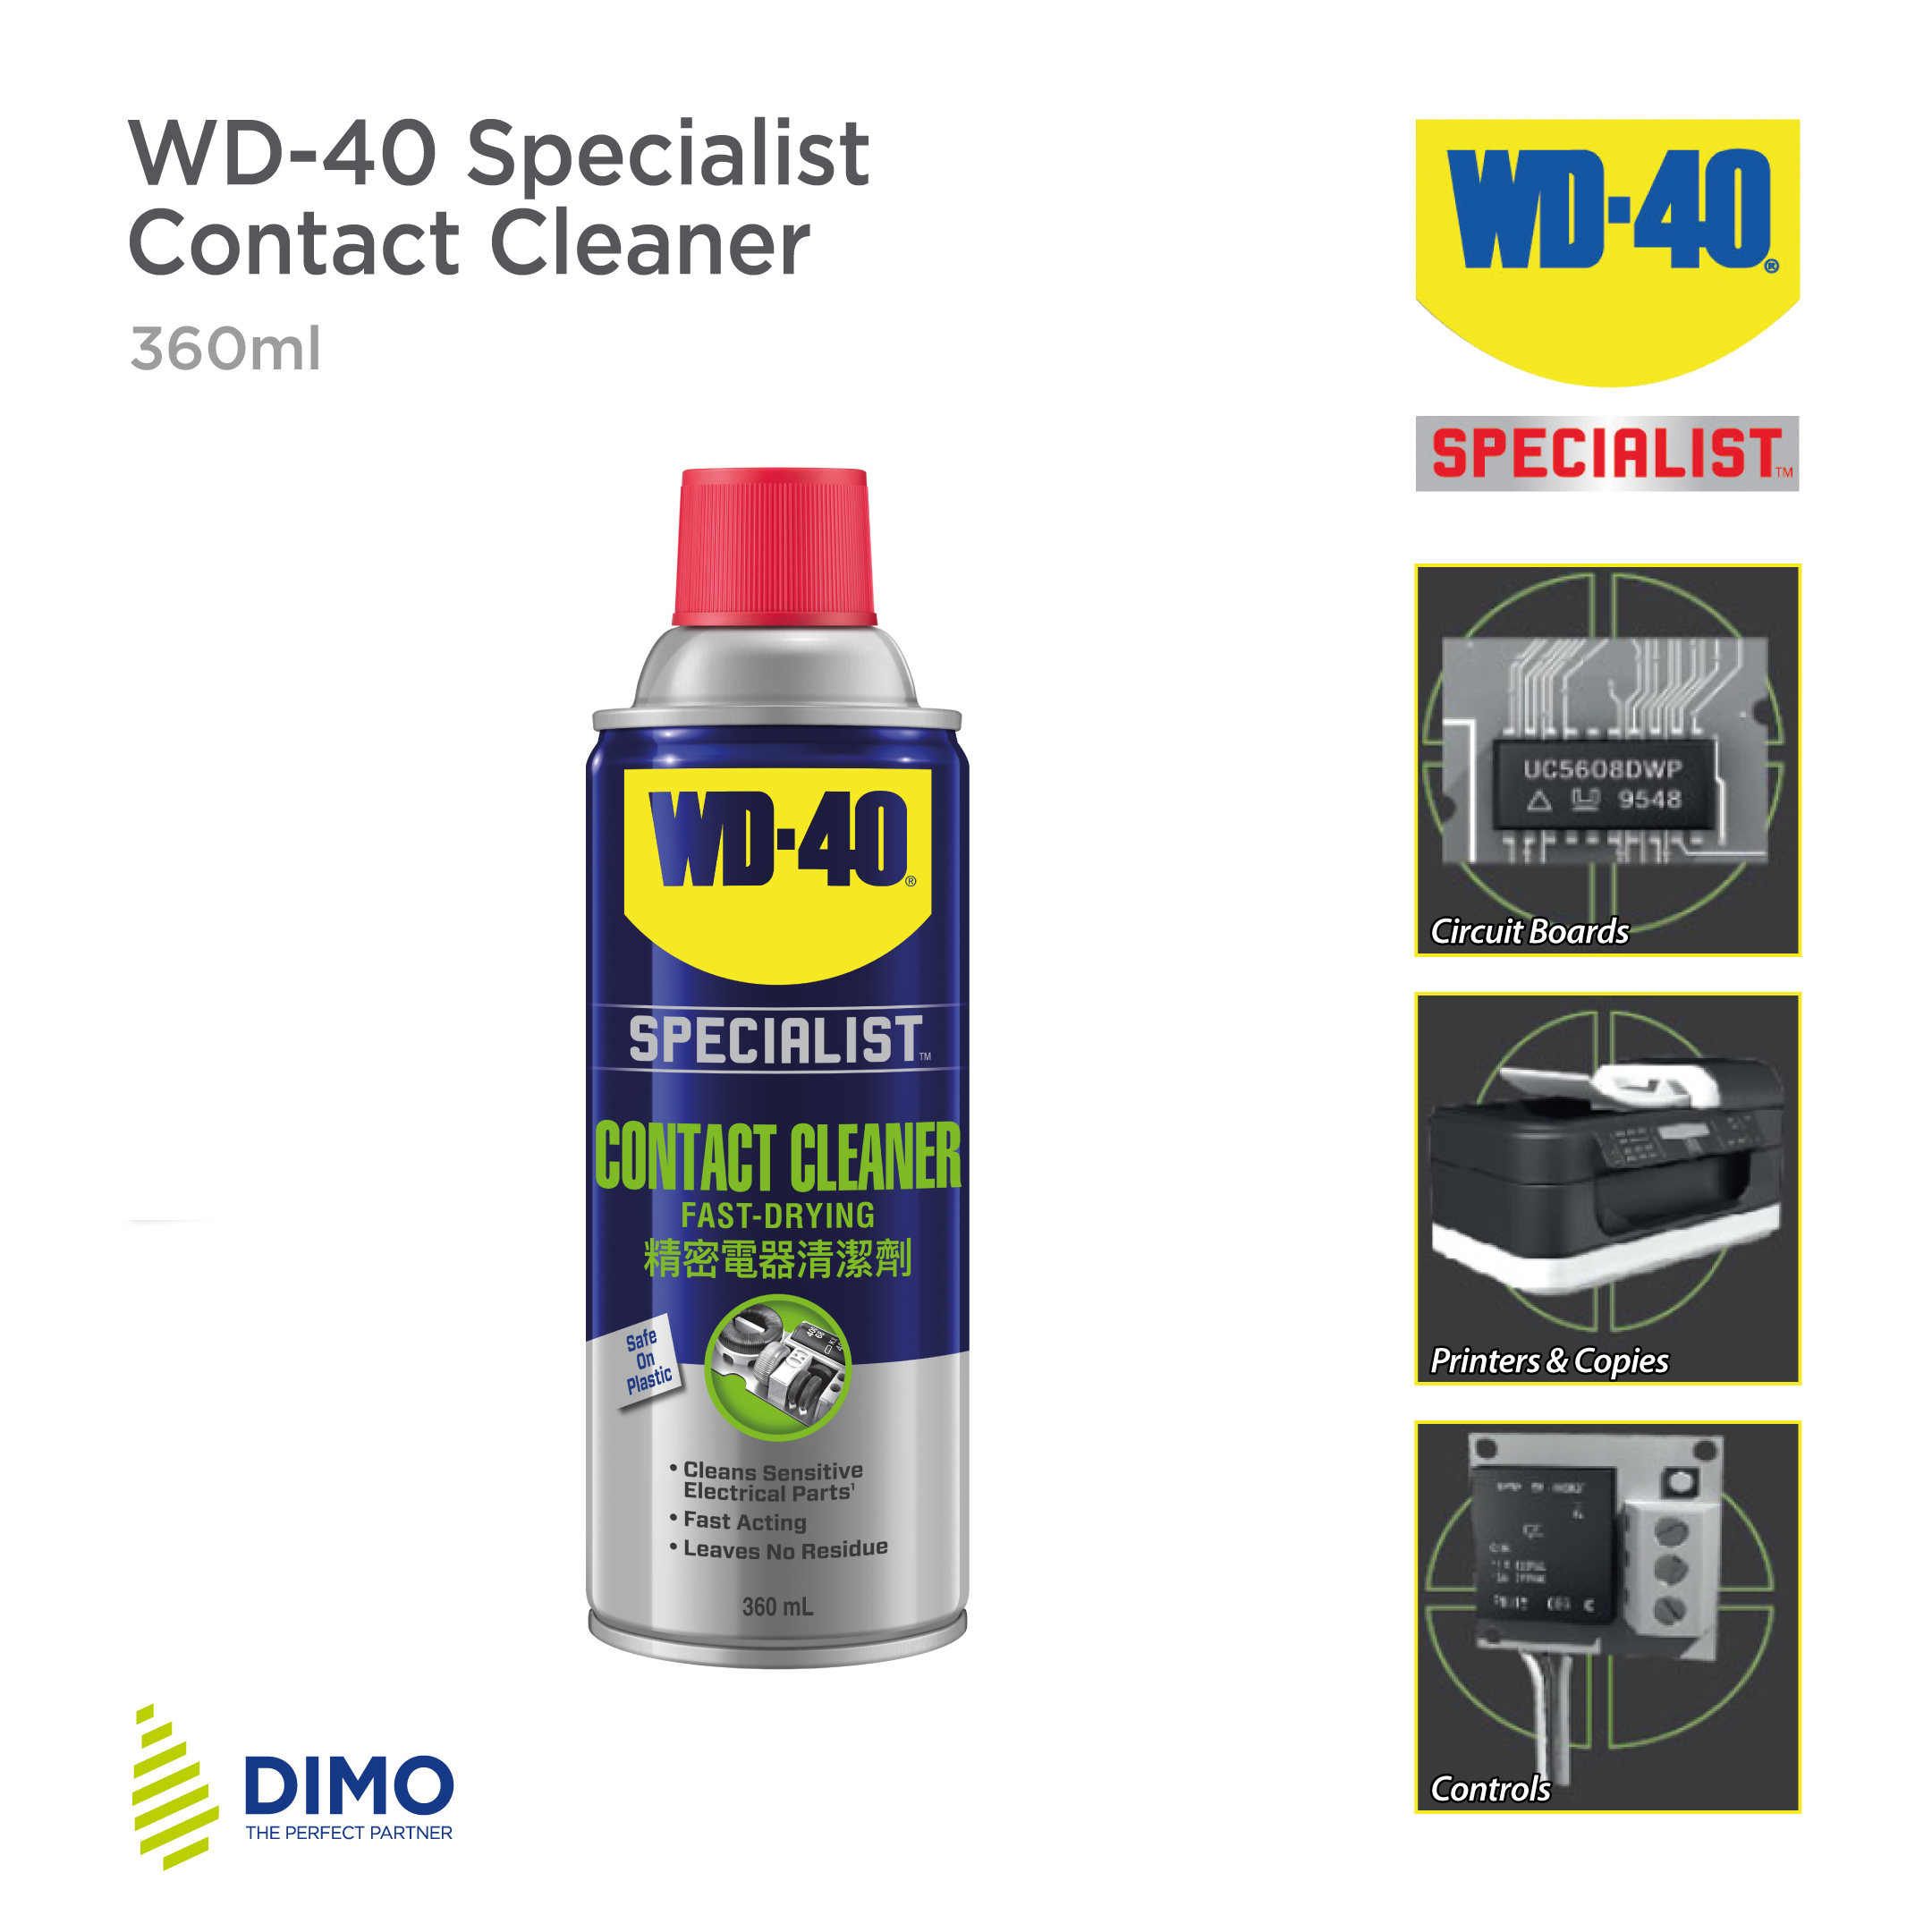 WD-40-Specialist-Contact-Cleaner-360ml copy